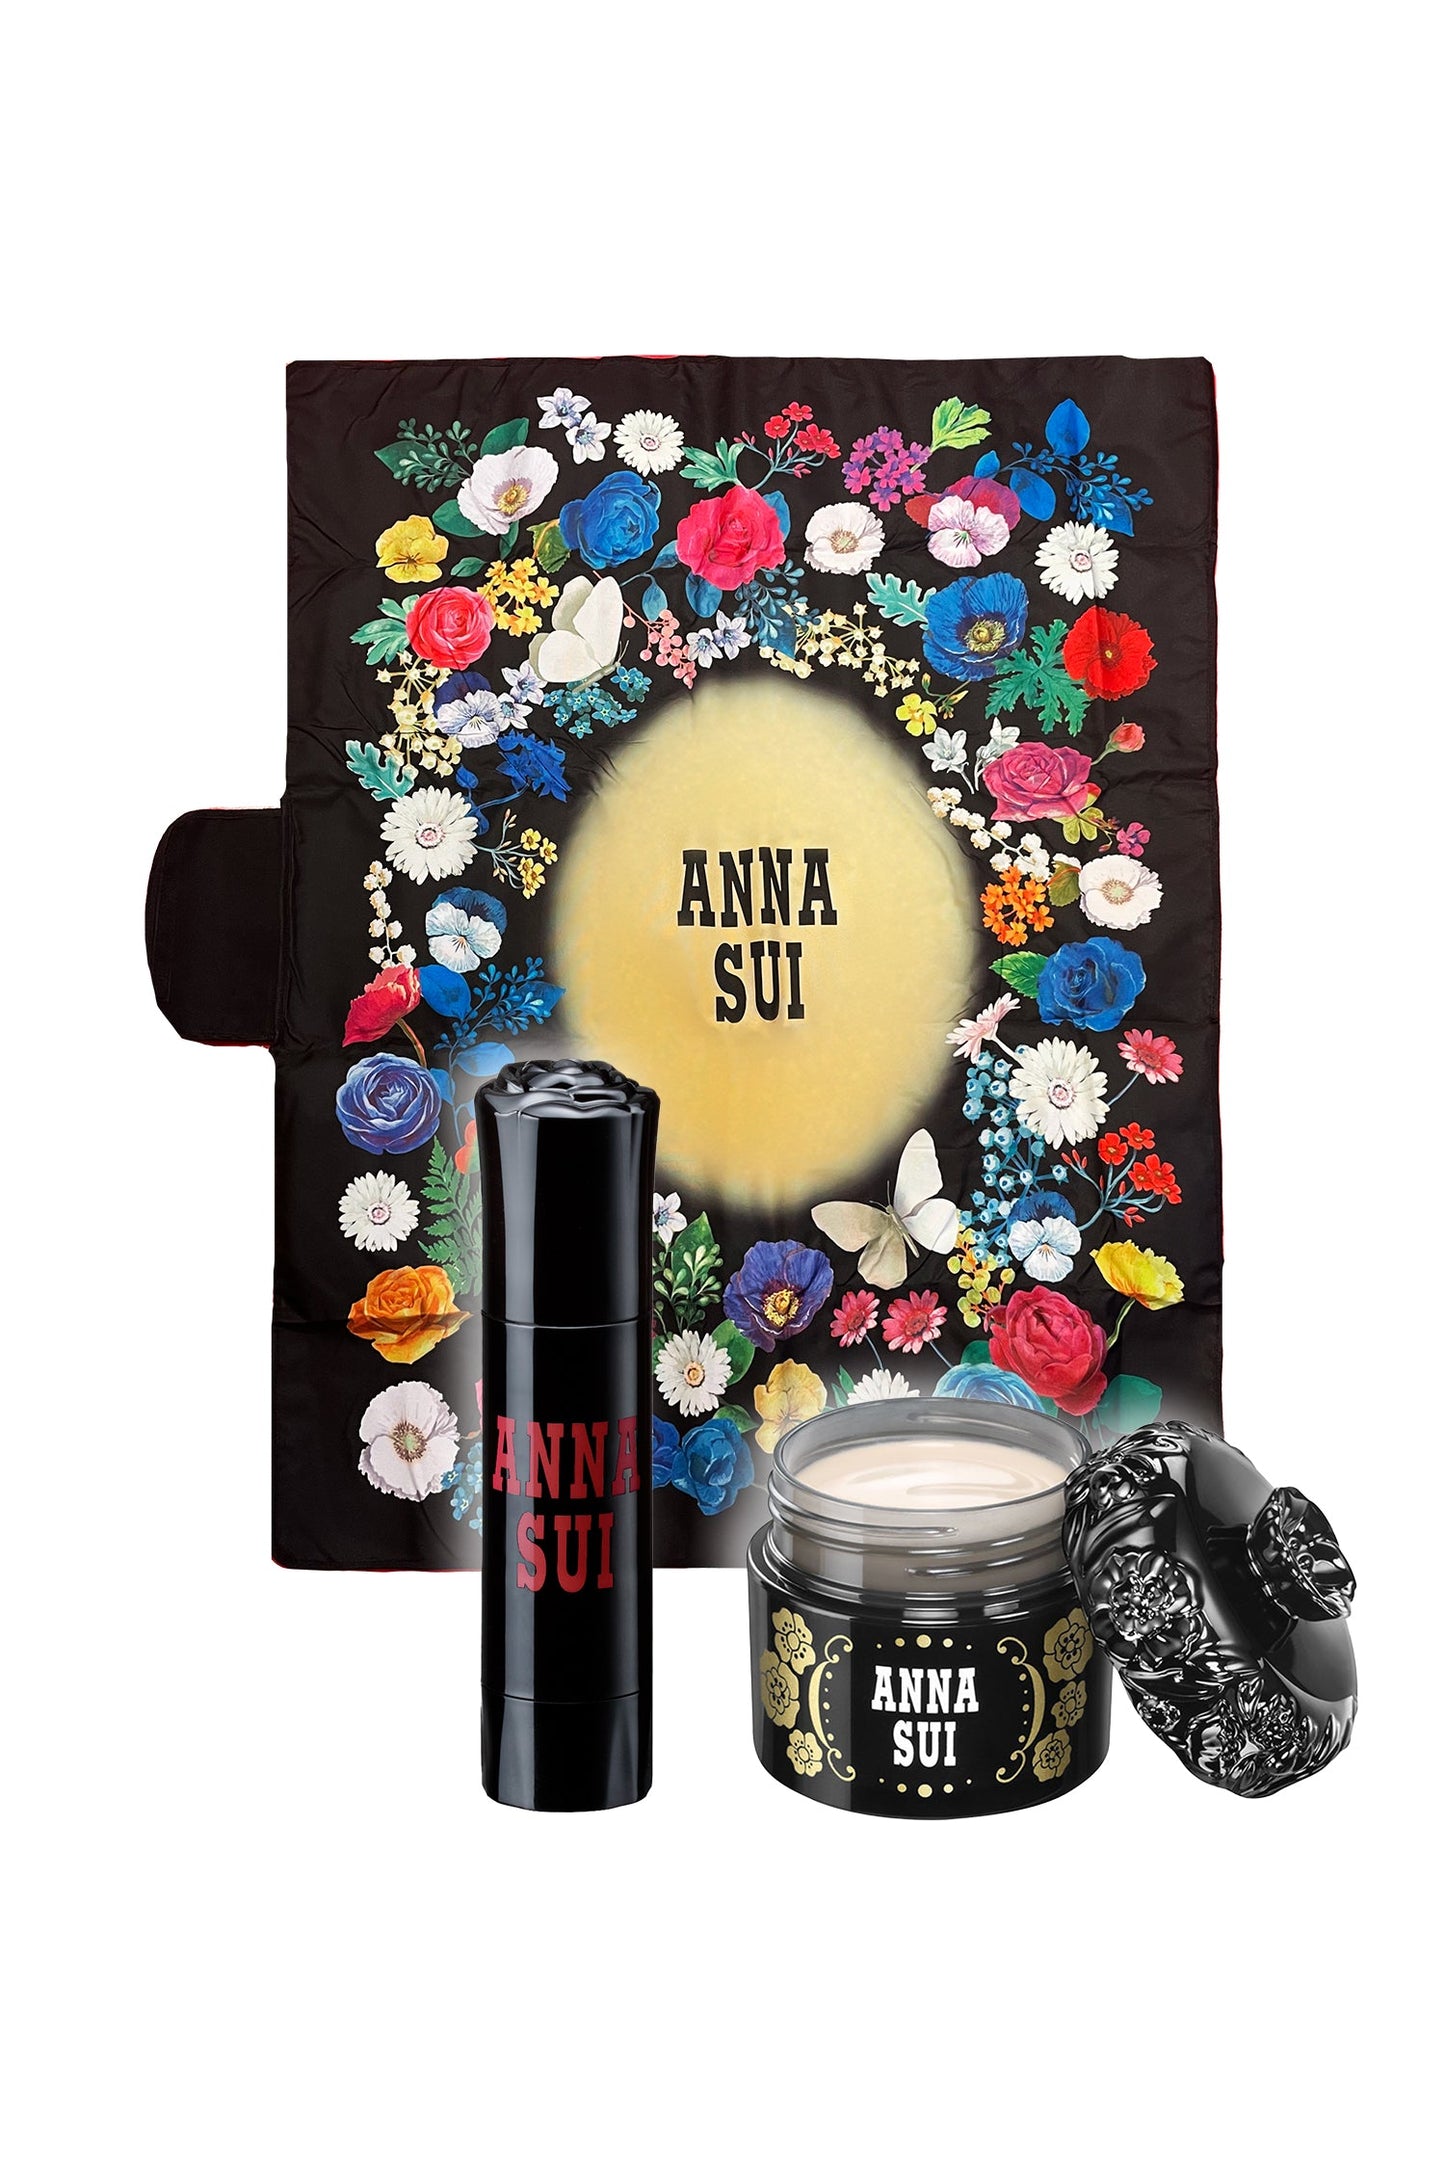 BERRY cheek & primer set, the Anna Sui on cylinder case with a rose on top plus a black round case  